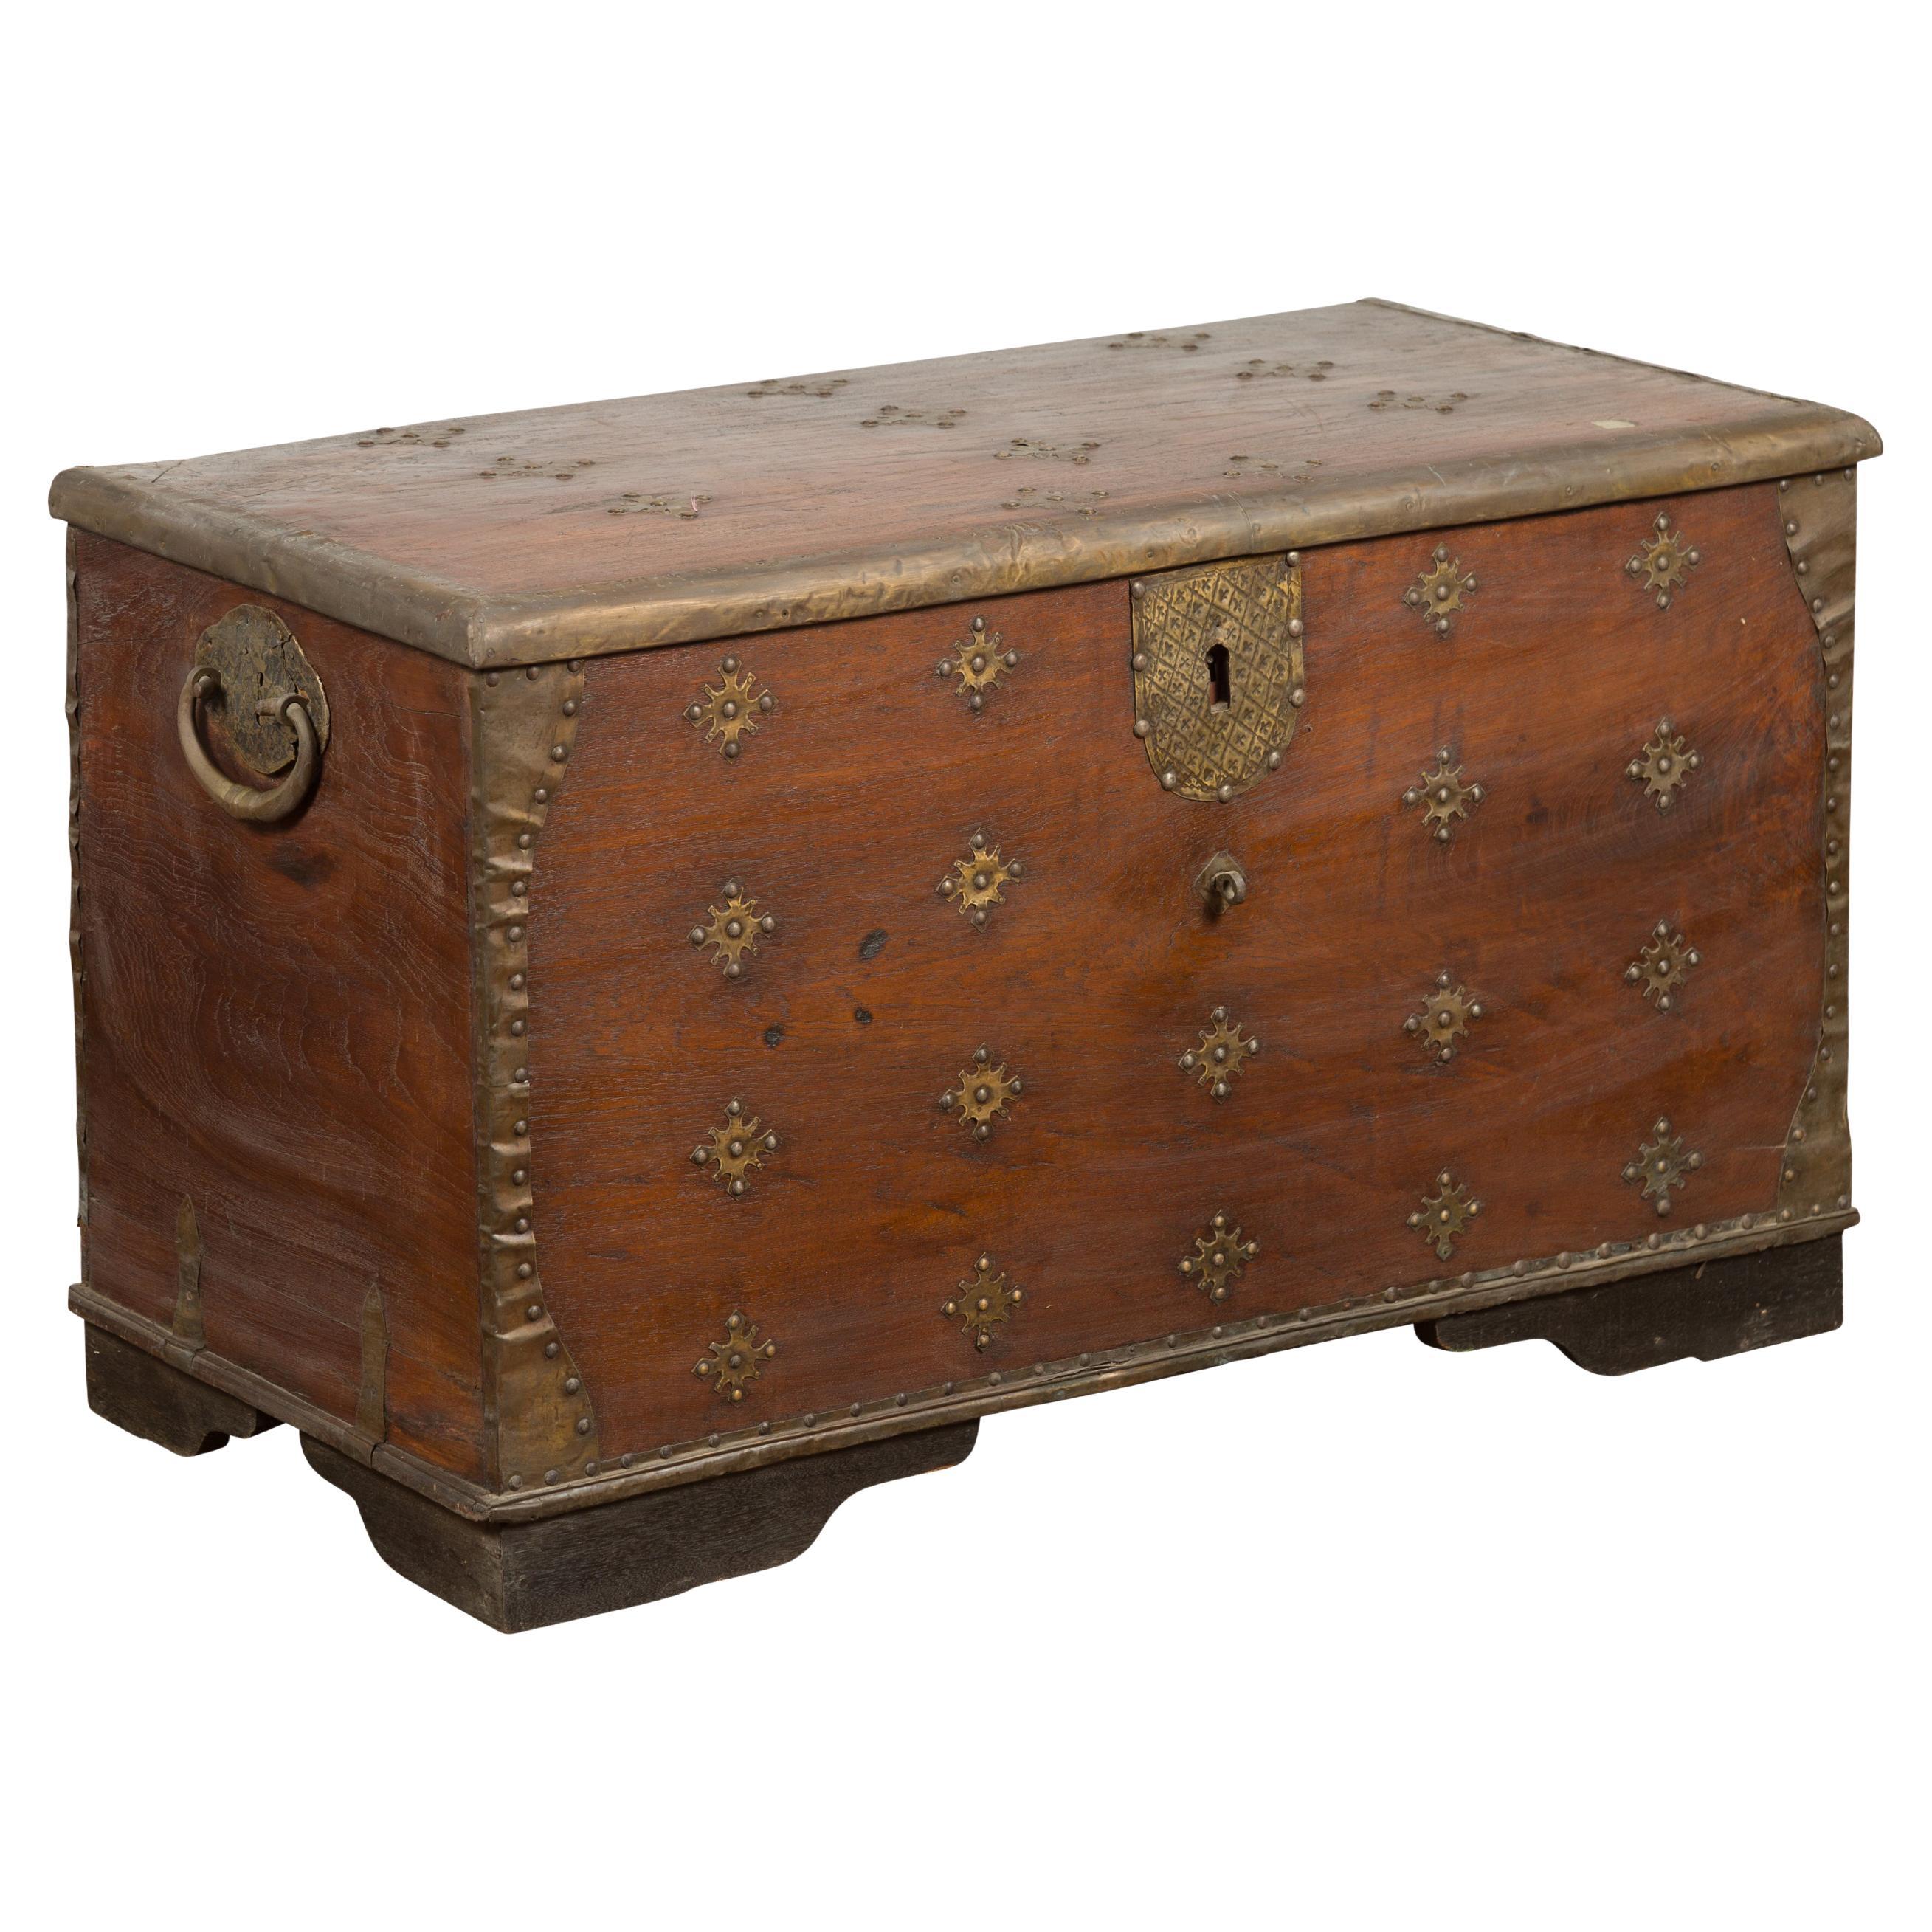 Vintage Indonesian Wooden Blanket Chest with Ornate Brass Star Shaped Motifs